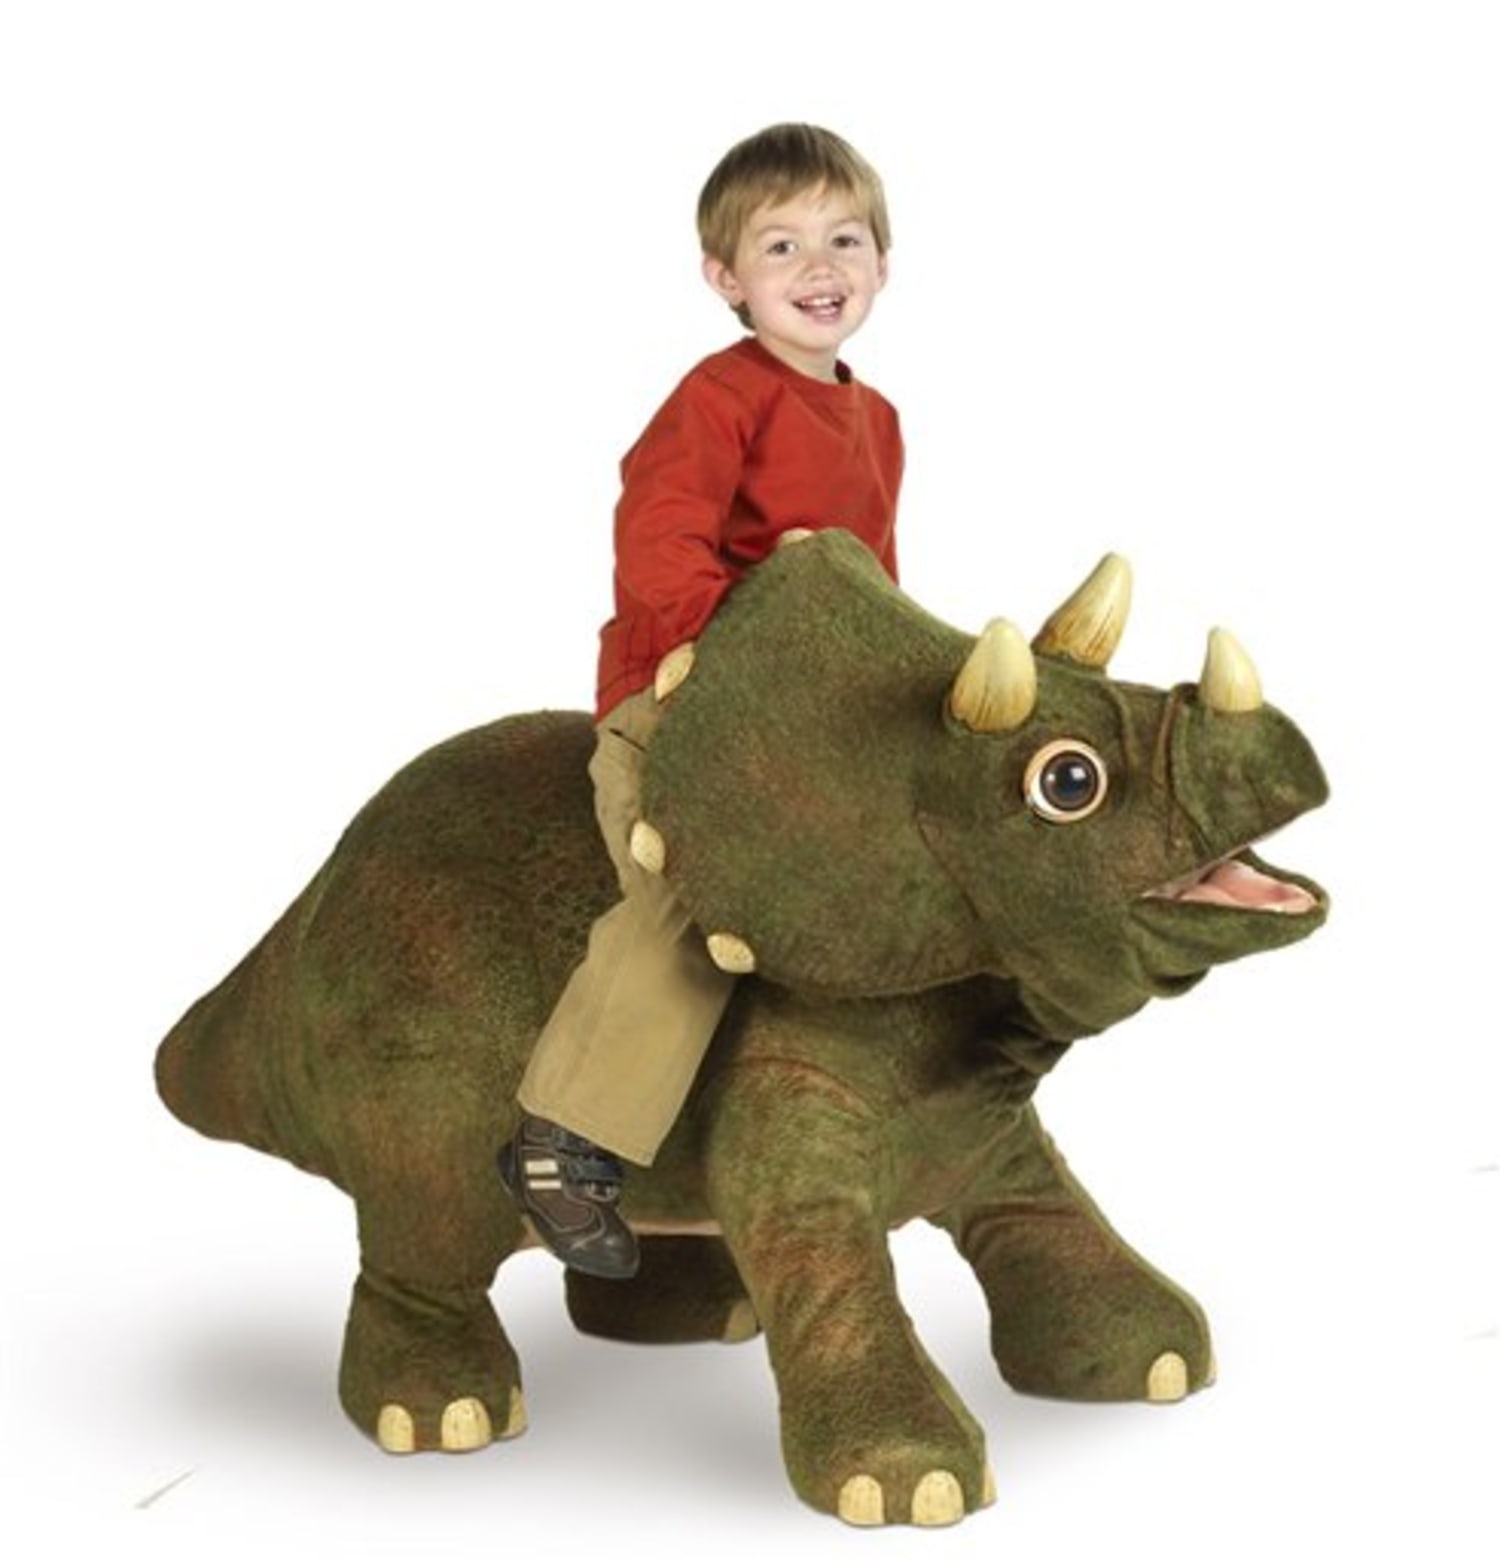 Riding dinosaur, robot top hot holiday toy list